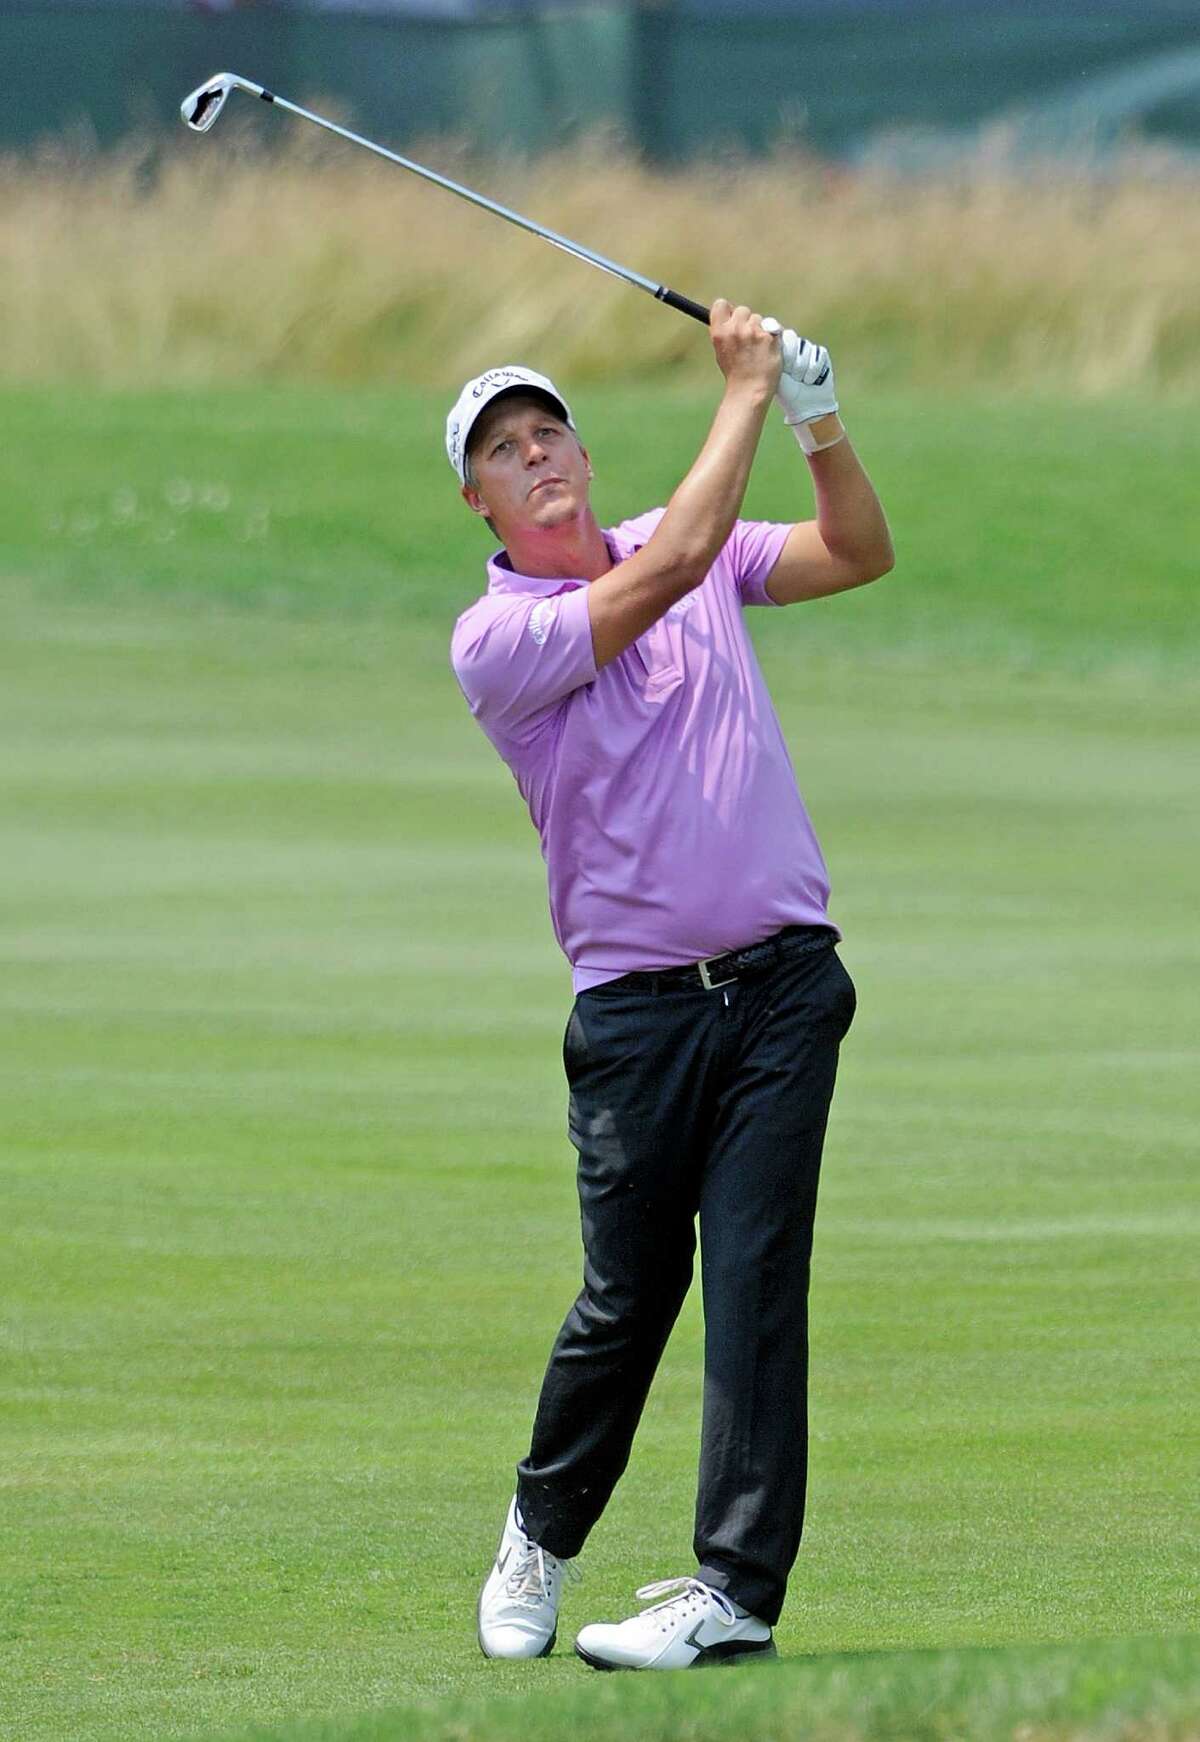 Frederik Jacobsen, of Sweden, watches his approach shot on the ninth hole during the second round of the Travelers Championship golf tournament in Cromwell, Conn., Friday, June 22, 2012. Jacobsen finish with a two-day score of 9-under-par. (AP Photo/Fred Beckham)